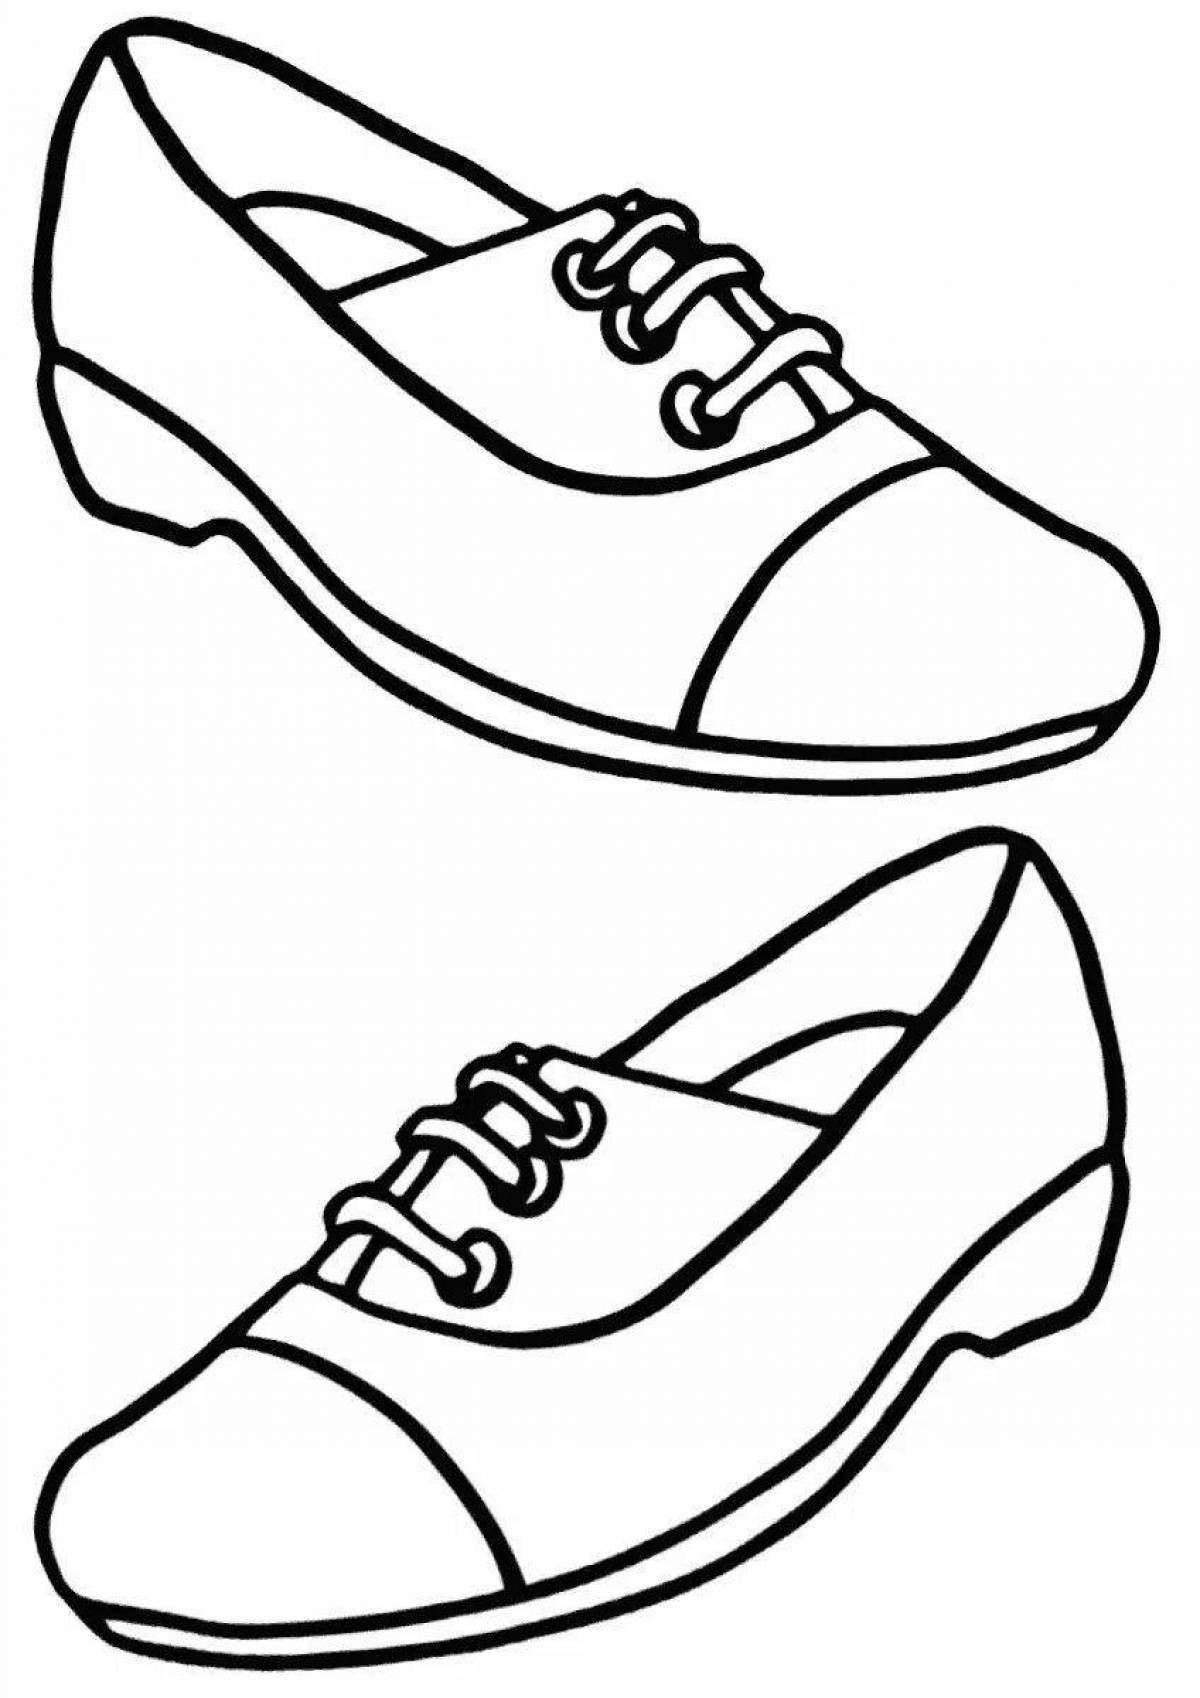 Coloring page stylish boots for kids